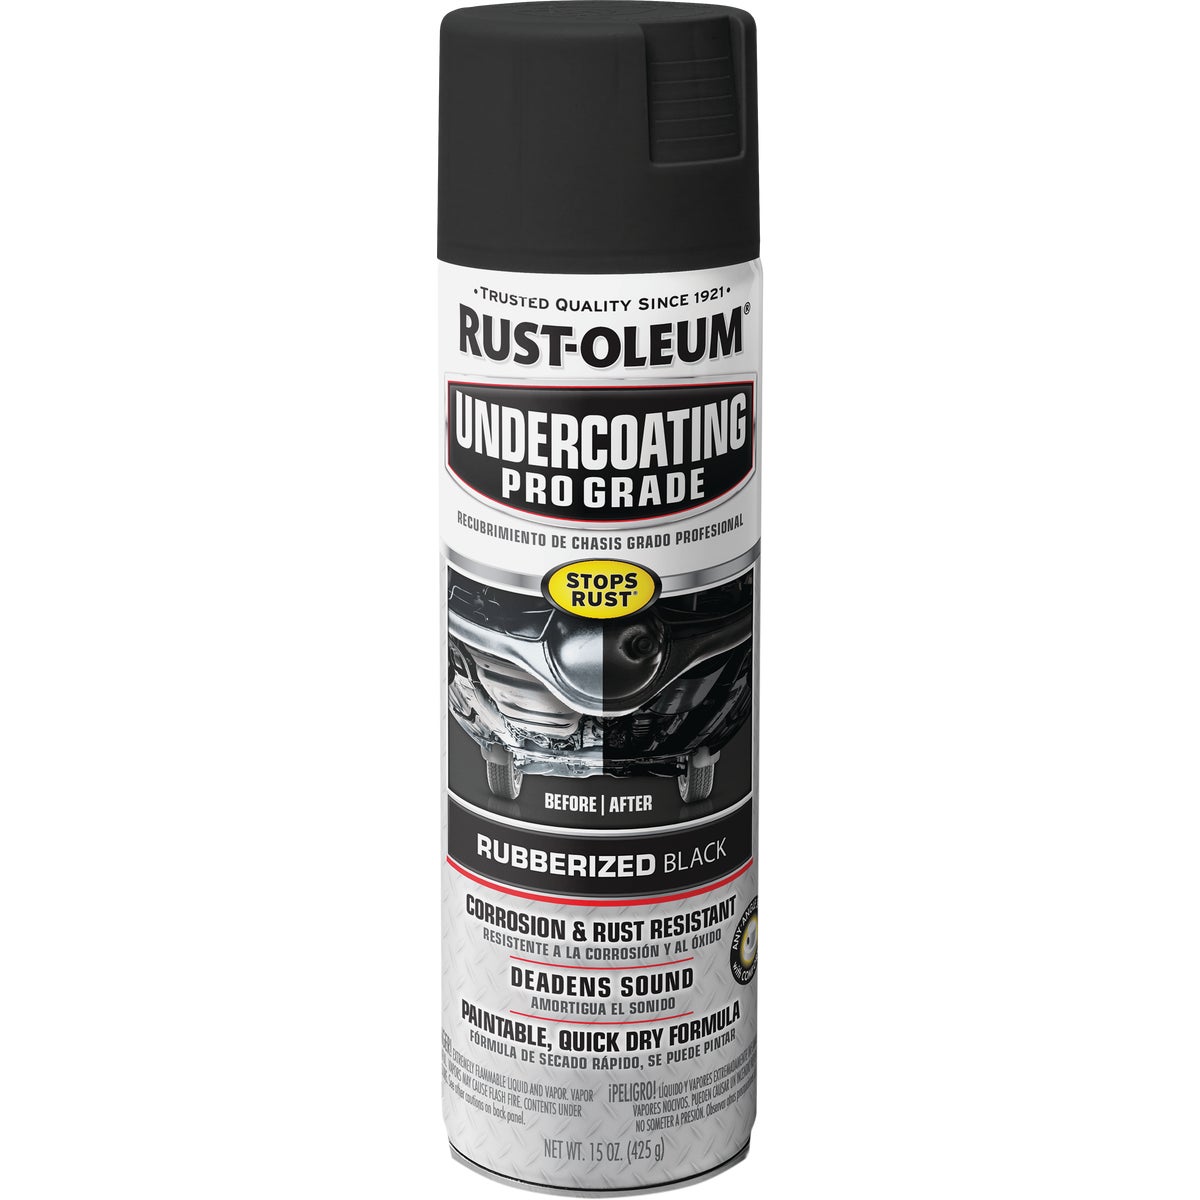 Item 771285, Rust-Oleum Professional Undercoating is an easy to use, black rubberized 